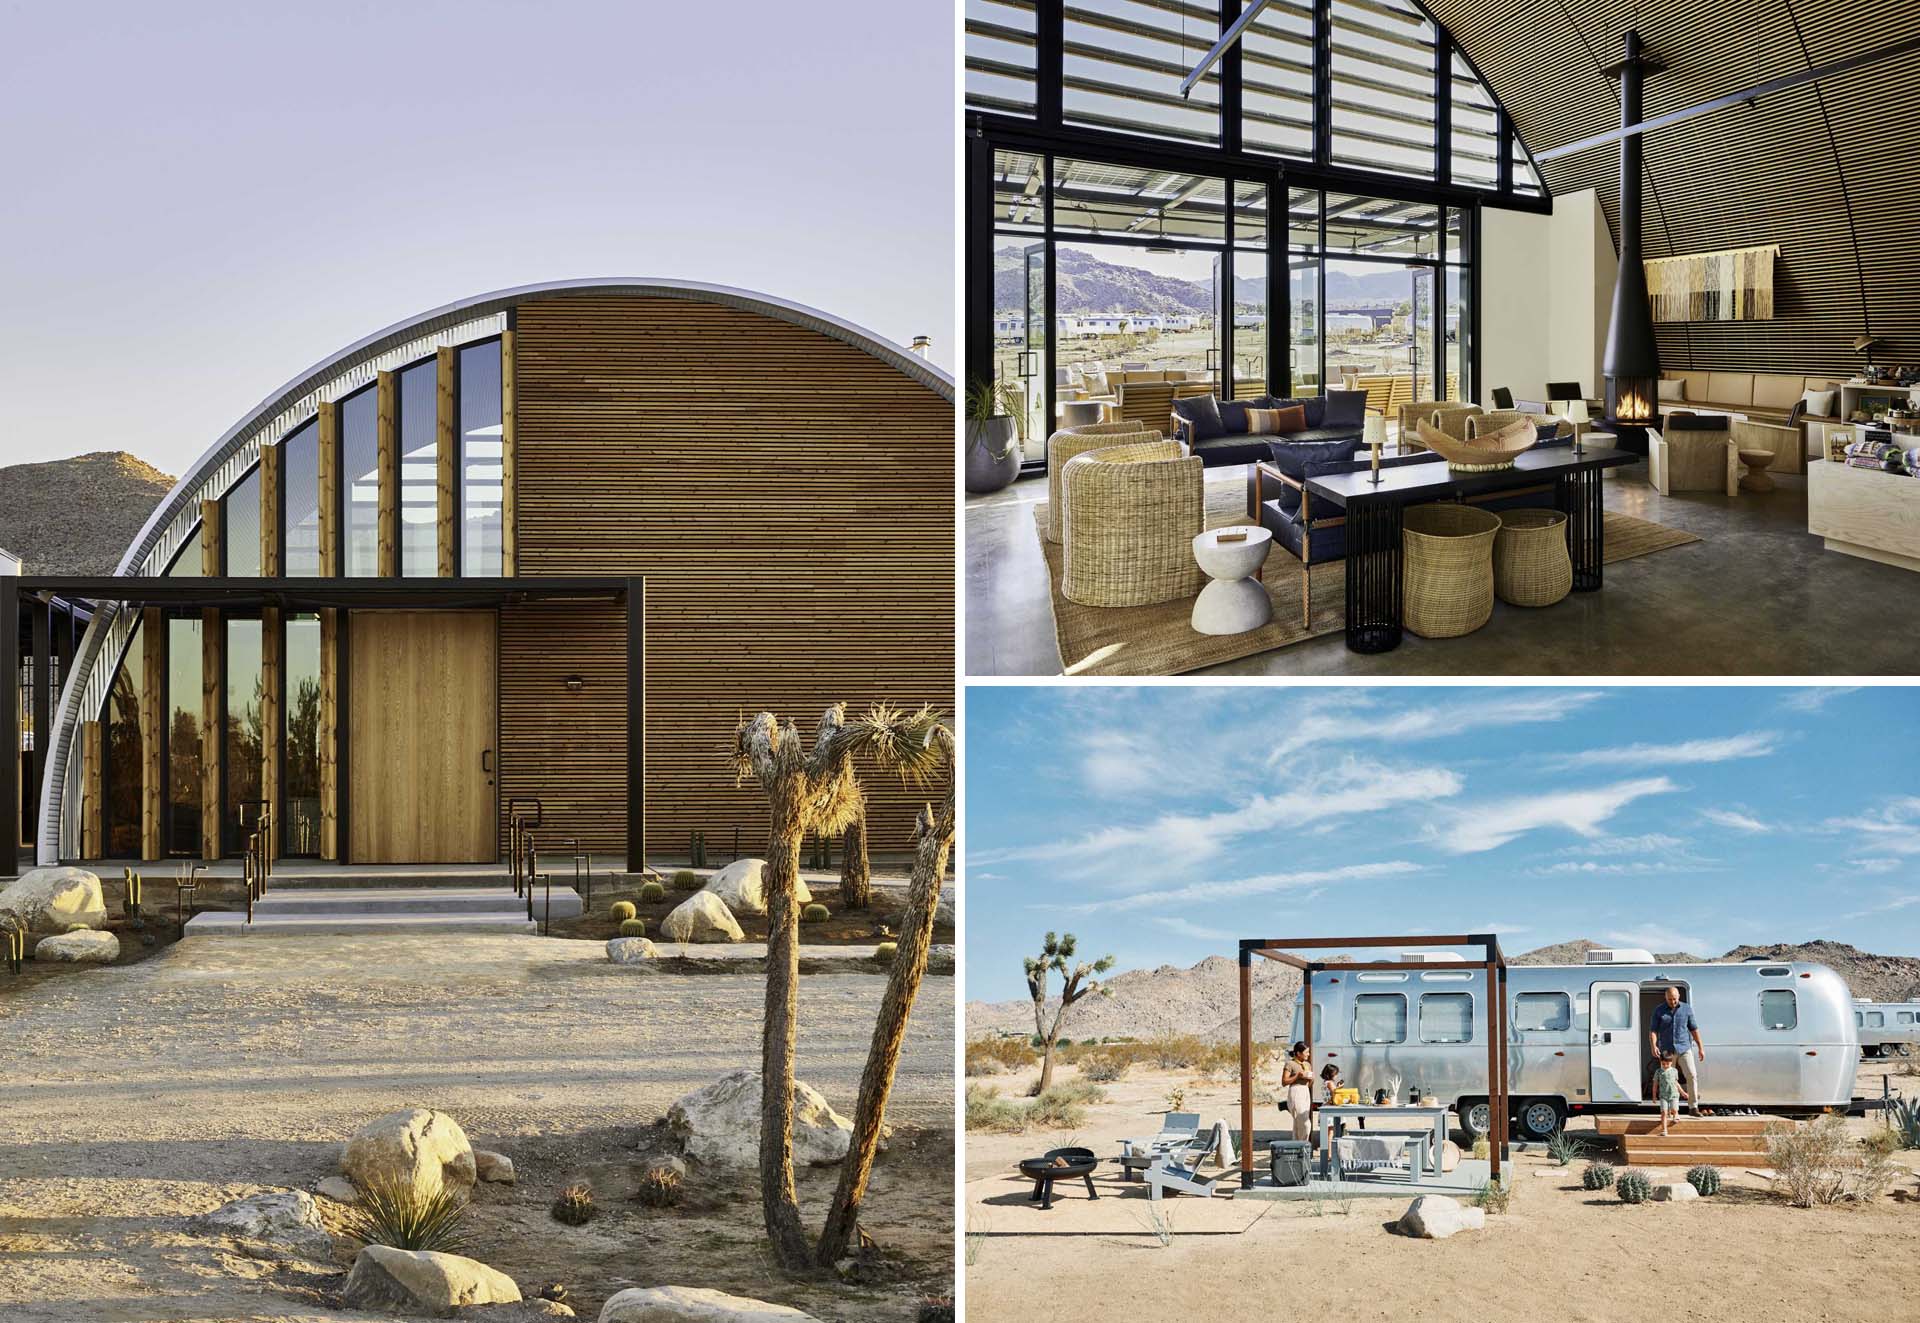 Surrounded by the famed Joshua Trees and subtle rock formations of the Southern California’s desert area, AutoCamp is a 25-acre property featuring 47 Airstreams, four Accessible Suites, and four X Suites, and a clubhouse.